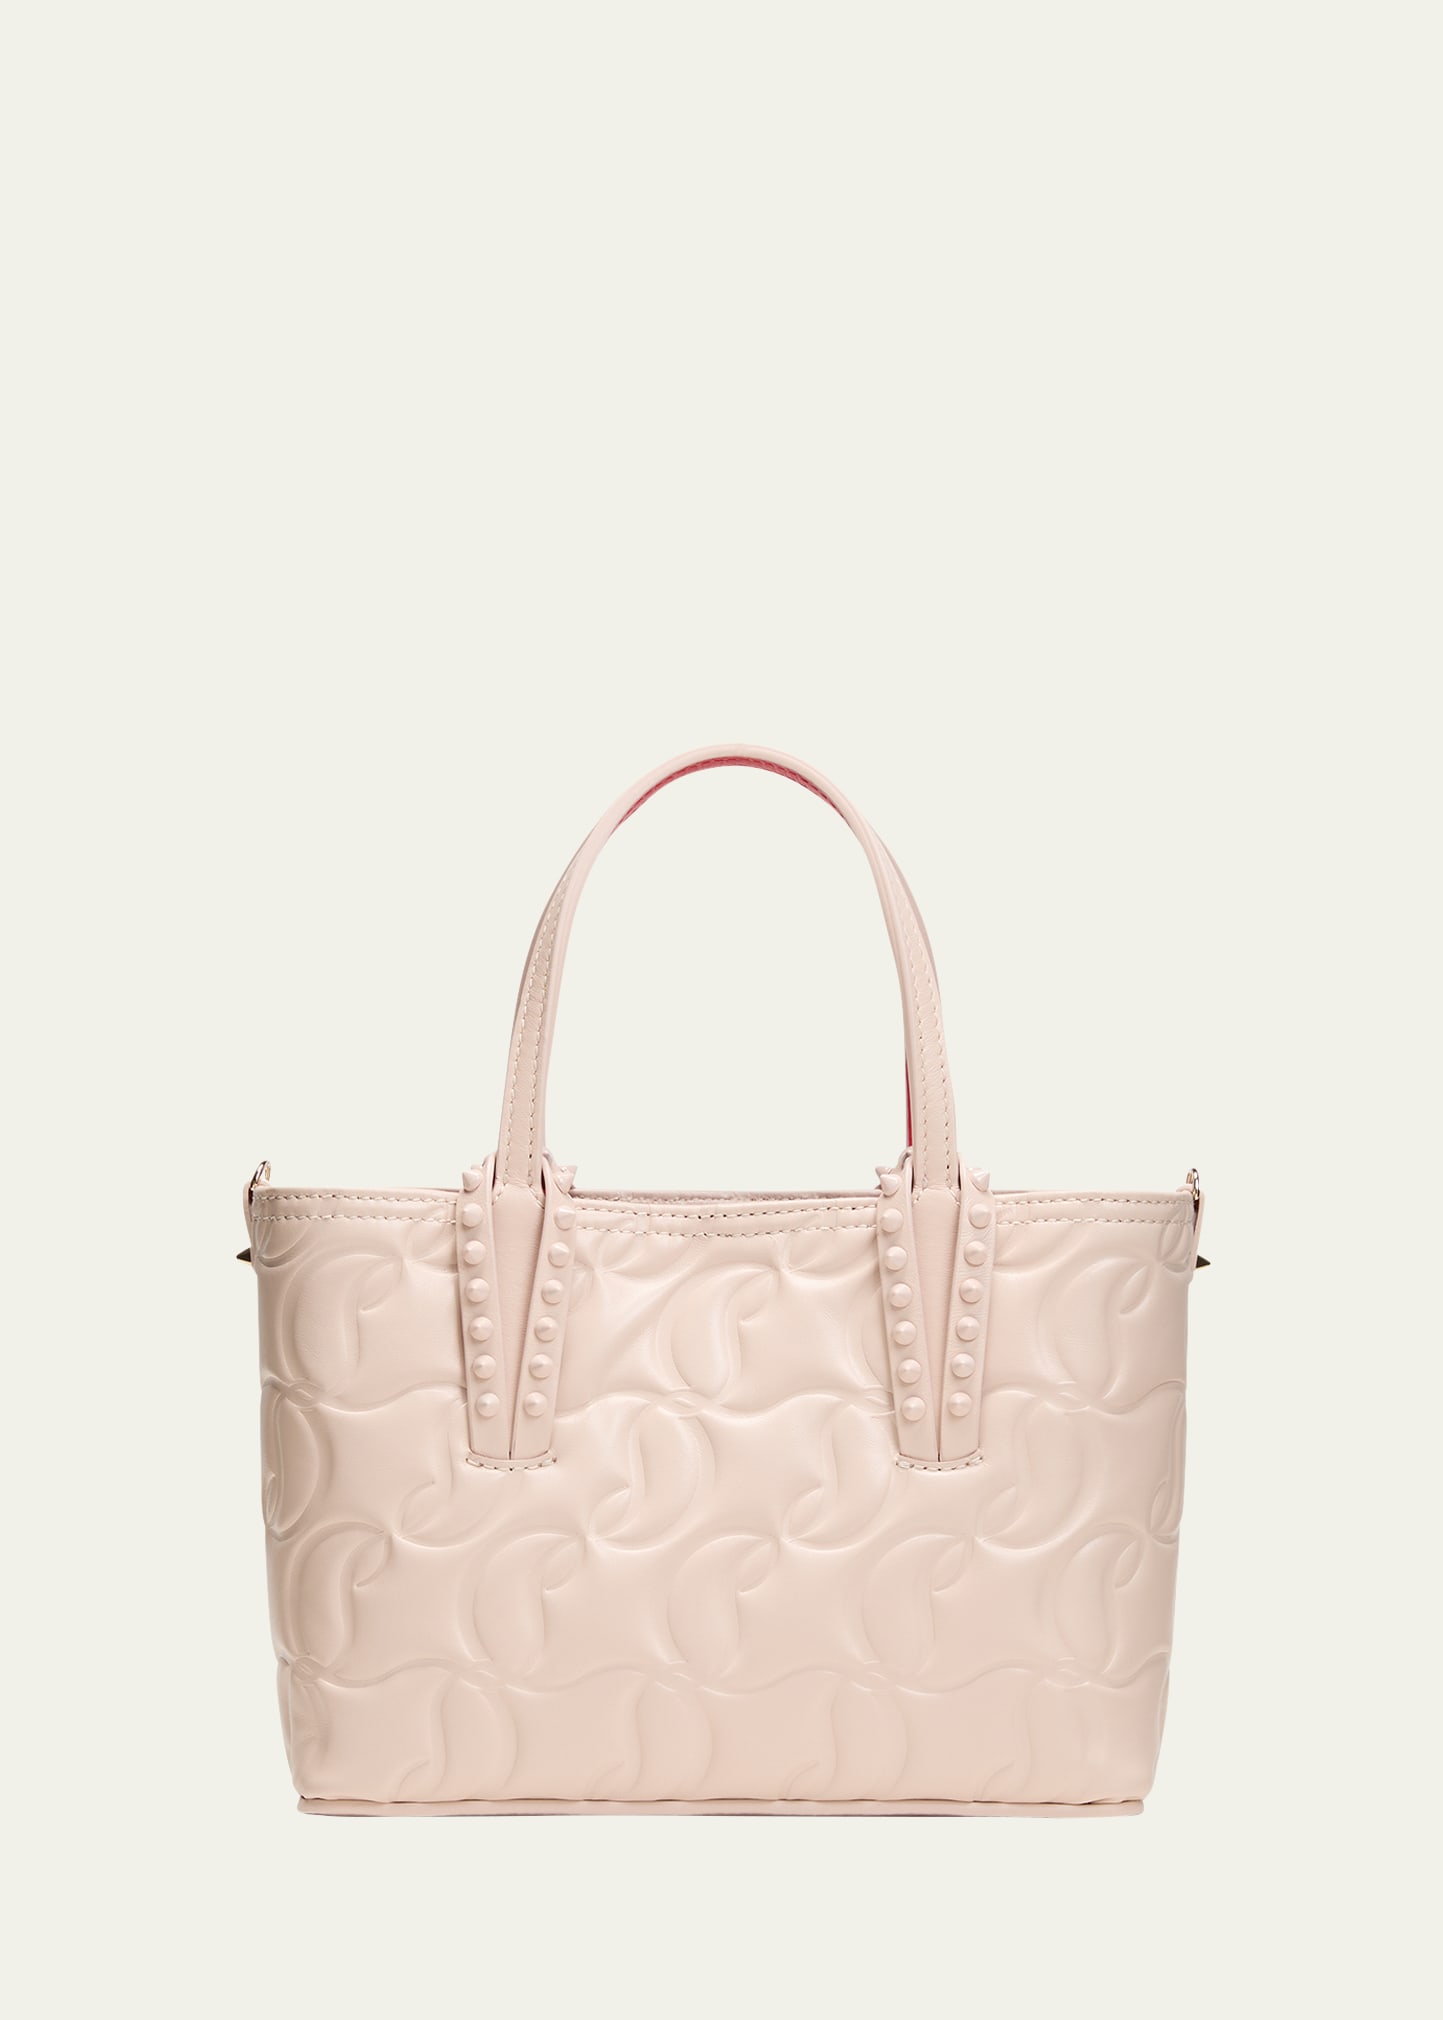 Cabata Mini Tote in CL Embossed Nappa Leather